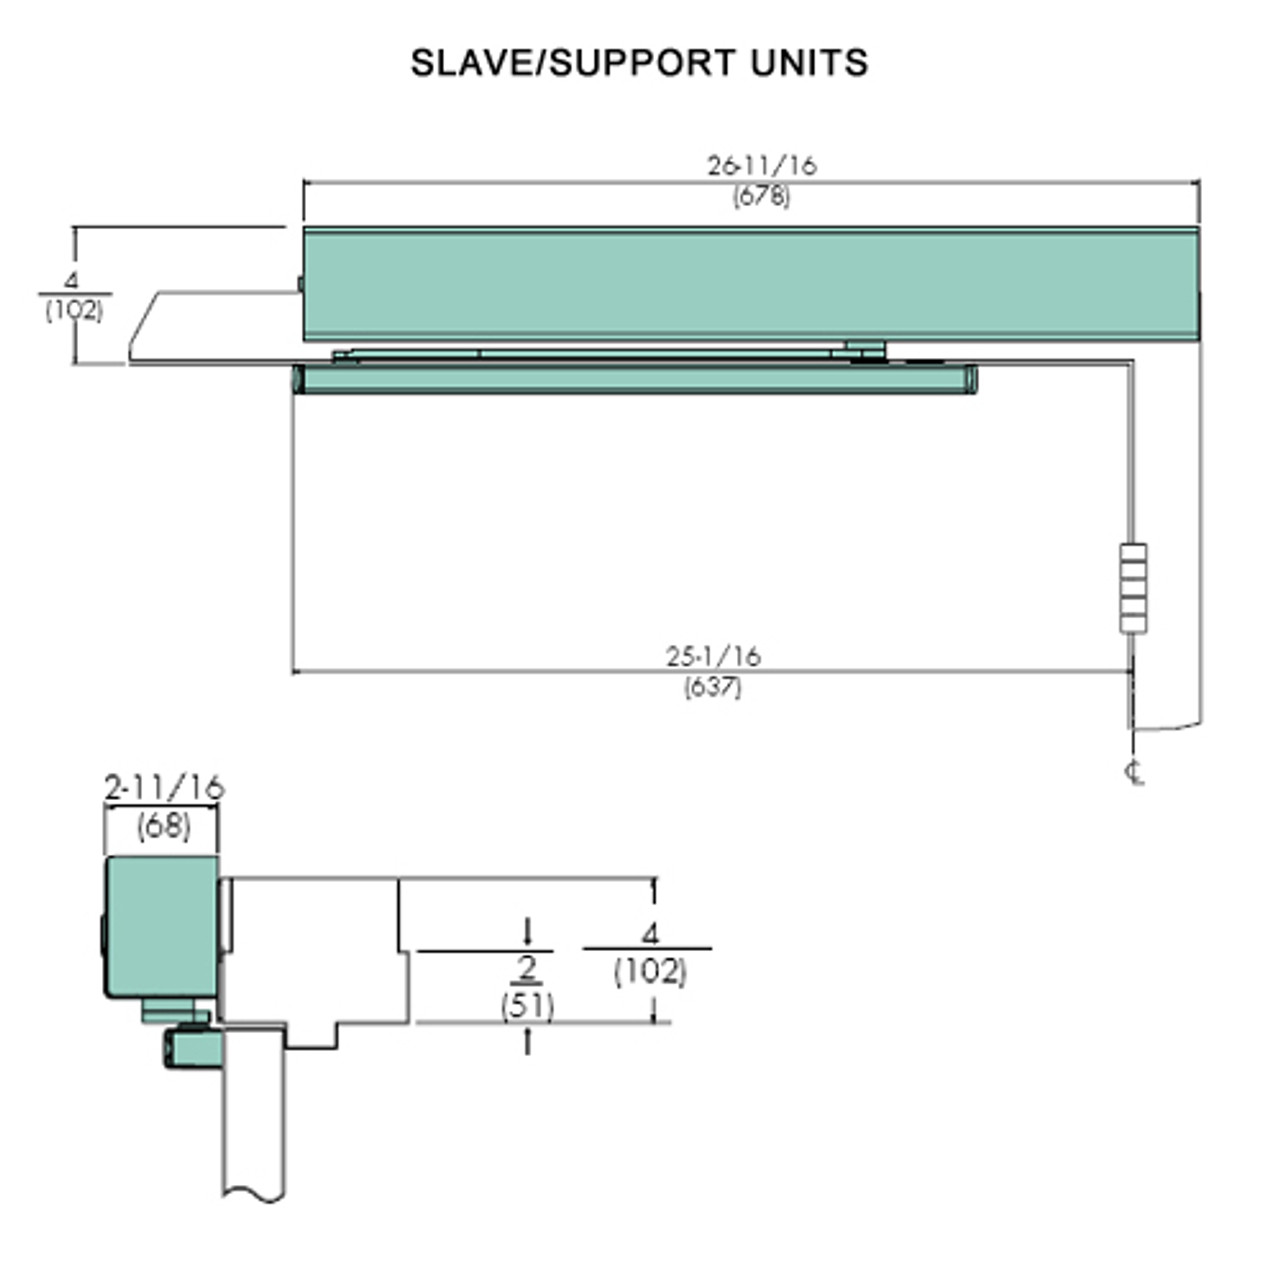 7214MPSO-RH-24VDC-691 Norton 7200 Series Electromechanical Closer and Holder with Rigid Arm Slide Track Slave/Support Unit in Dull Bronze Finish